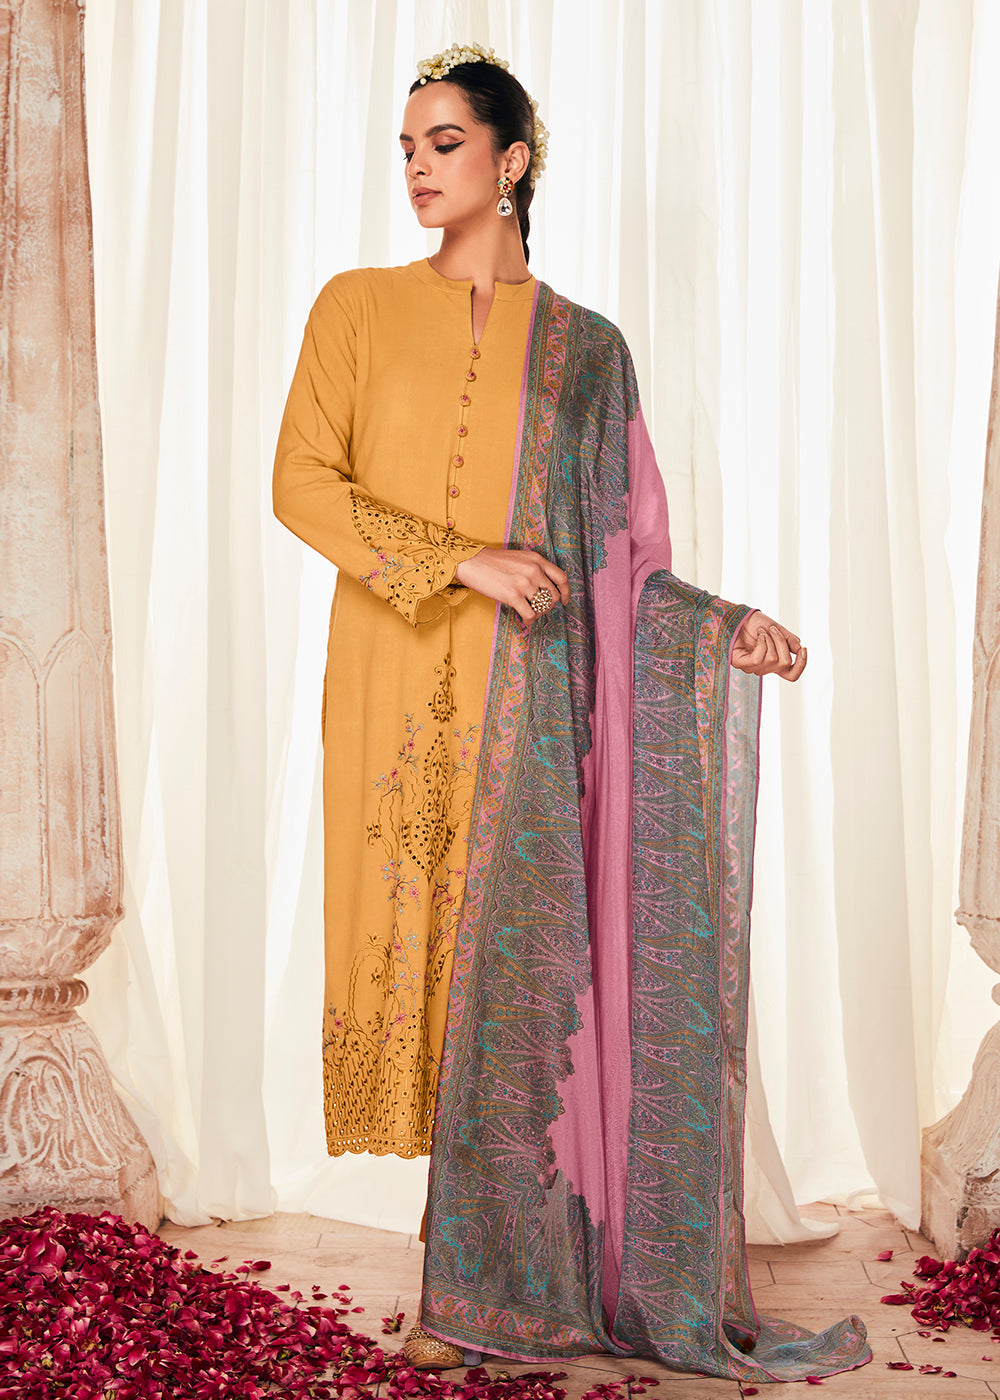 Buy Now Pleasing Yellow Suzani Inspired Embroidered Ethnic Salwar Suit Online in USA, UK, Canada, Germany, Australia & Worldwide at Empress Clothing.